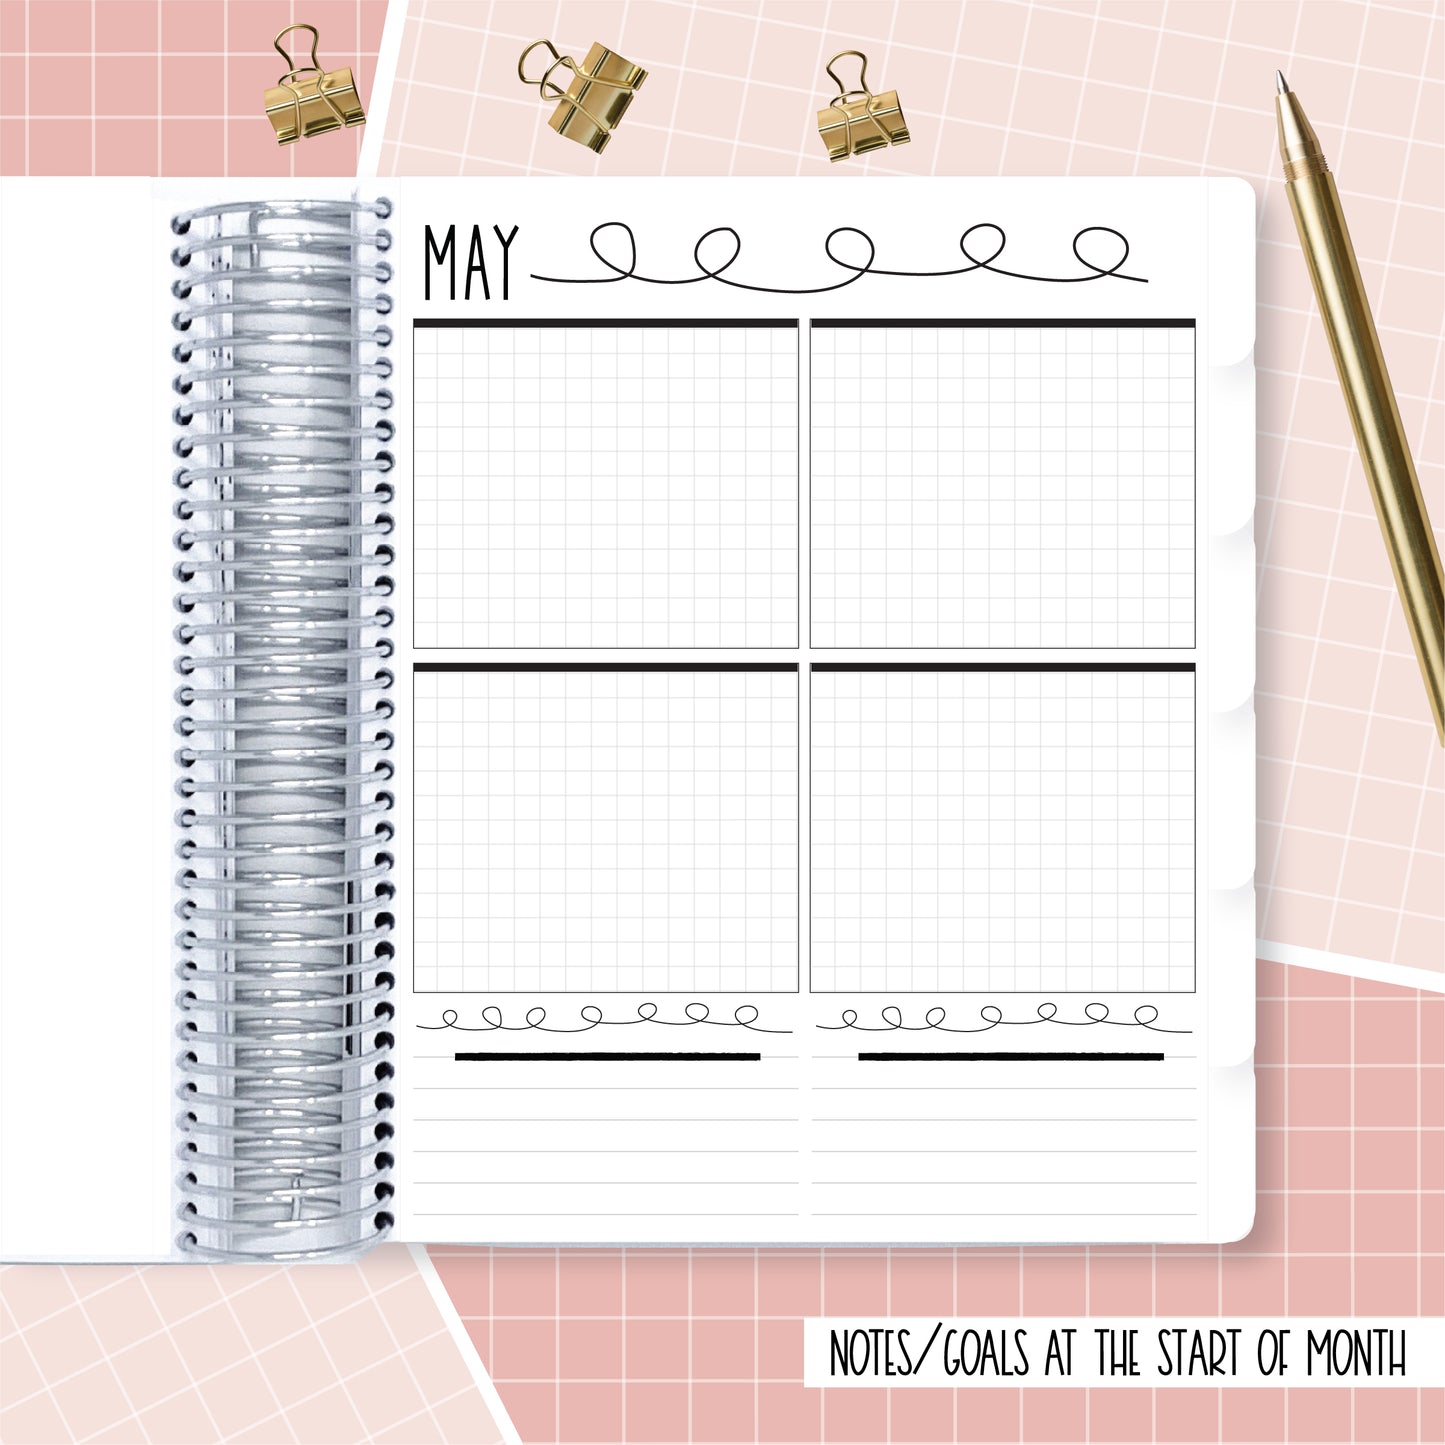 Cats & Butterflies - A5 Wide Daily Be Productive Planner